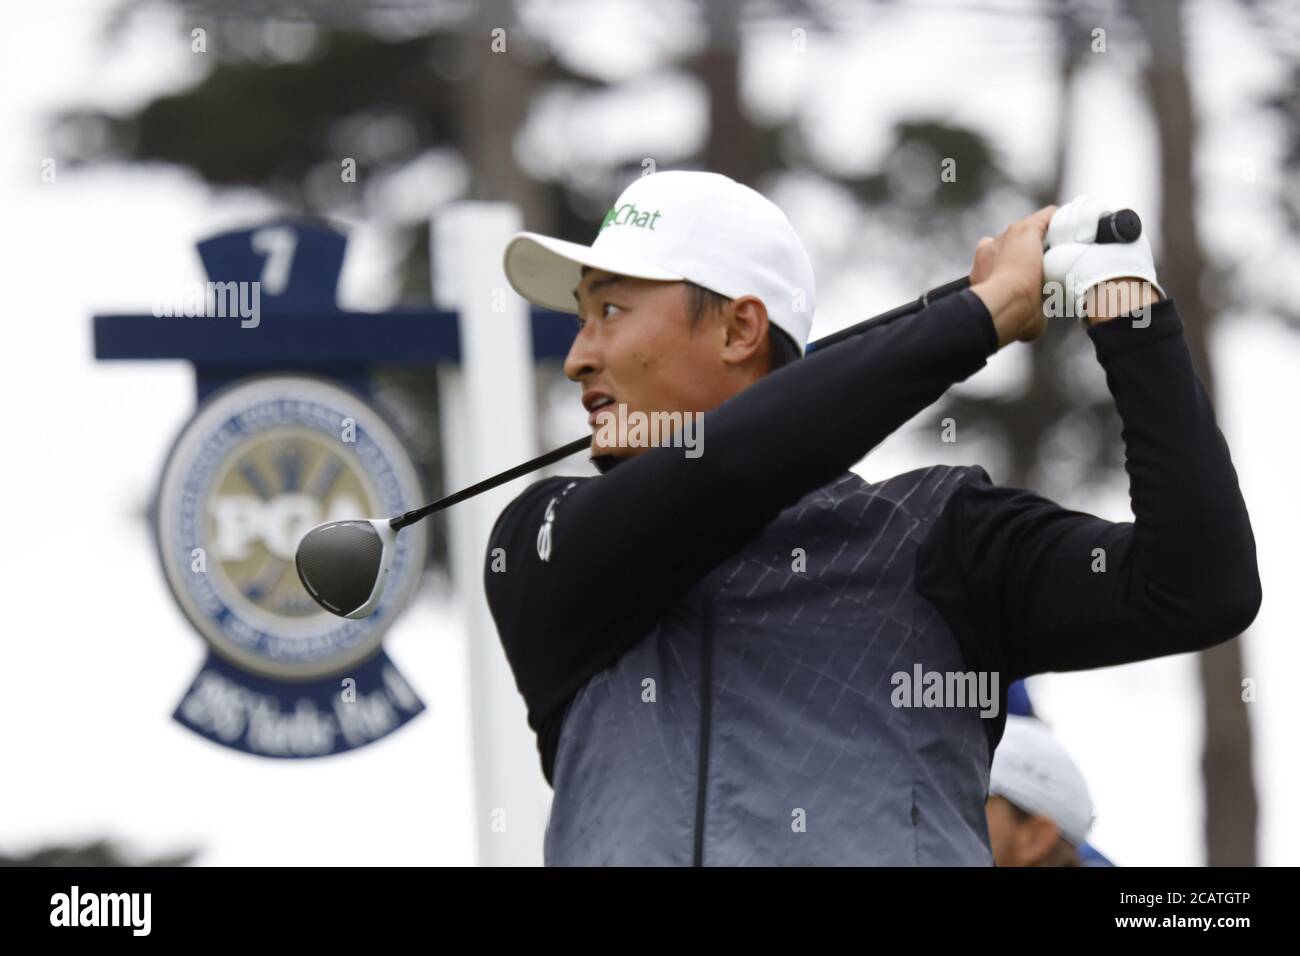 San Francisco, United States. 08th Aug, 2020. Li Haotong tee's off on the 7th hole in the third round of the 102nd PGA Championship at TPC Harding Park in San Francisco on Saturday, August 8, 2020. Photo by Peter DaSilvaUPI Credit: UPI/Alamy Live News Stock Photo